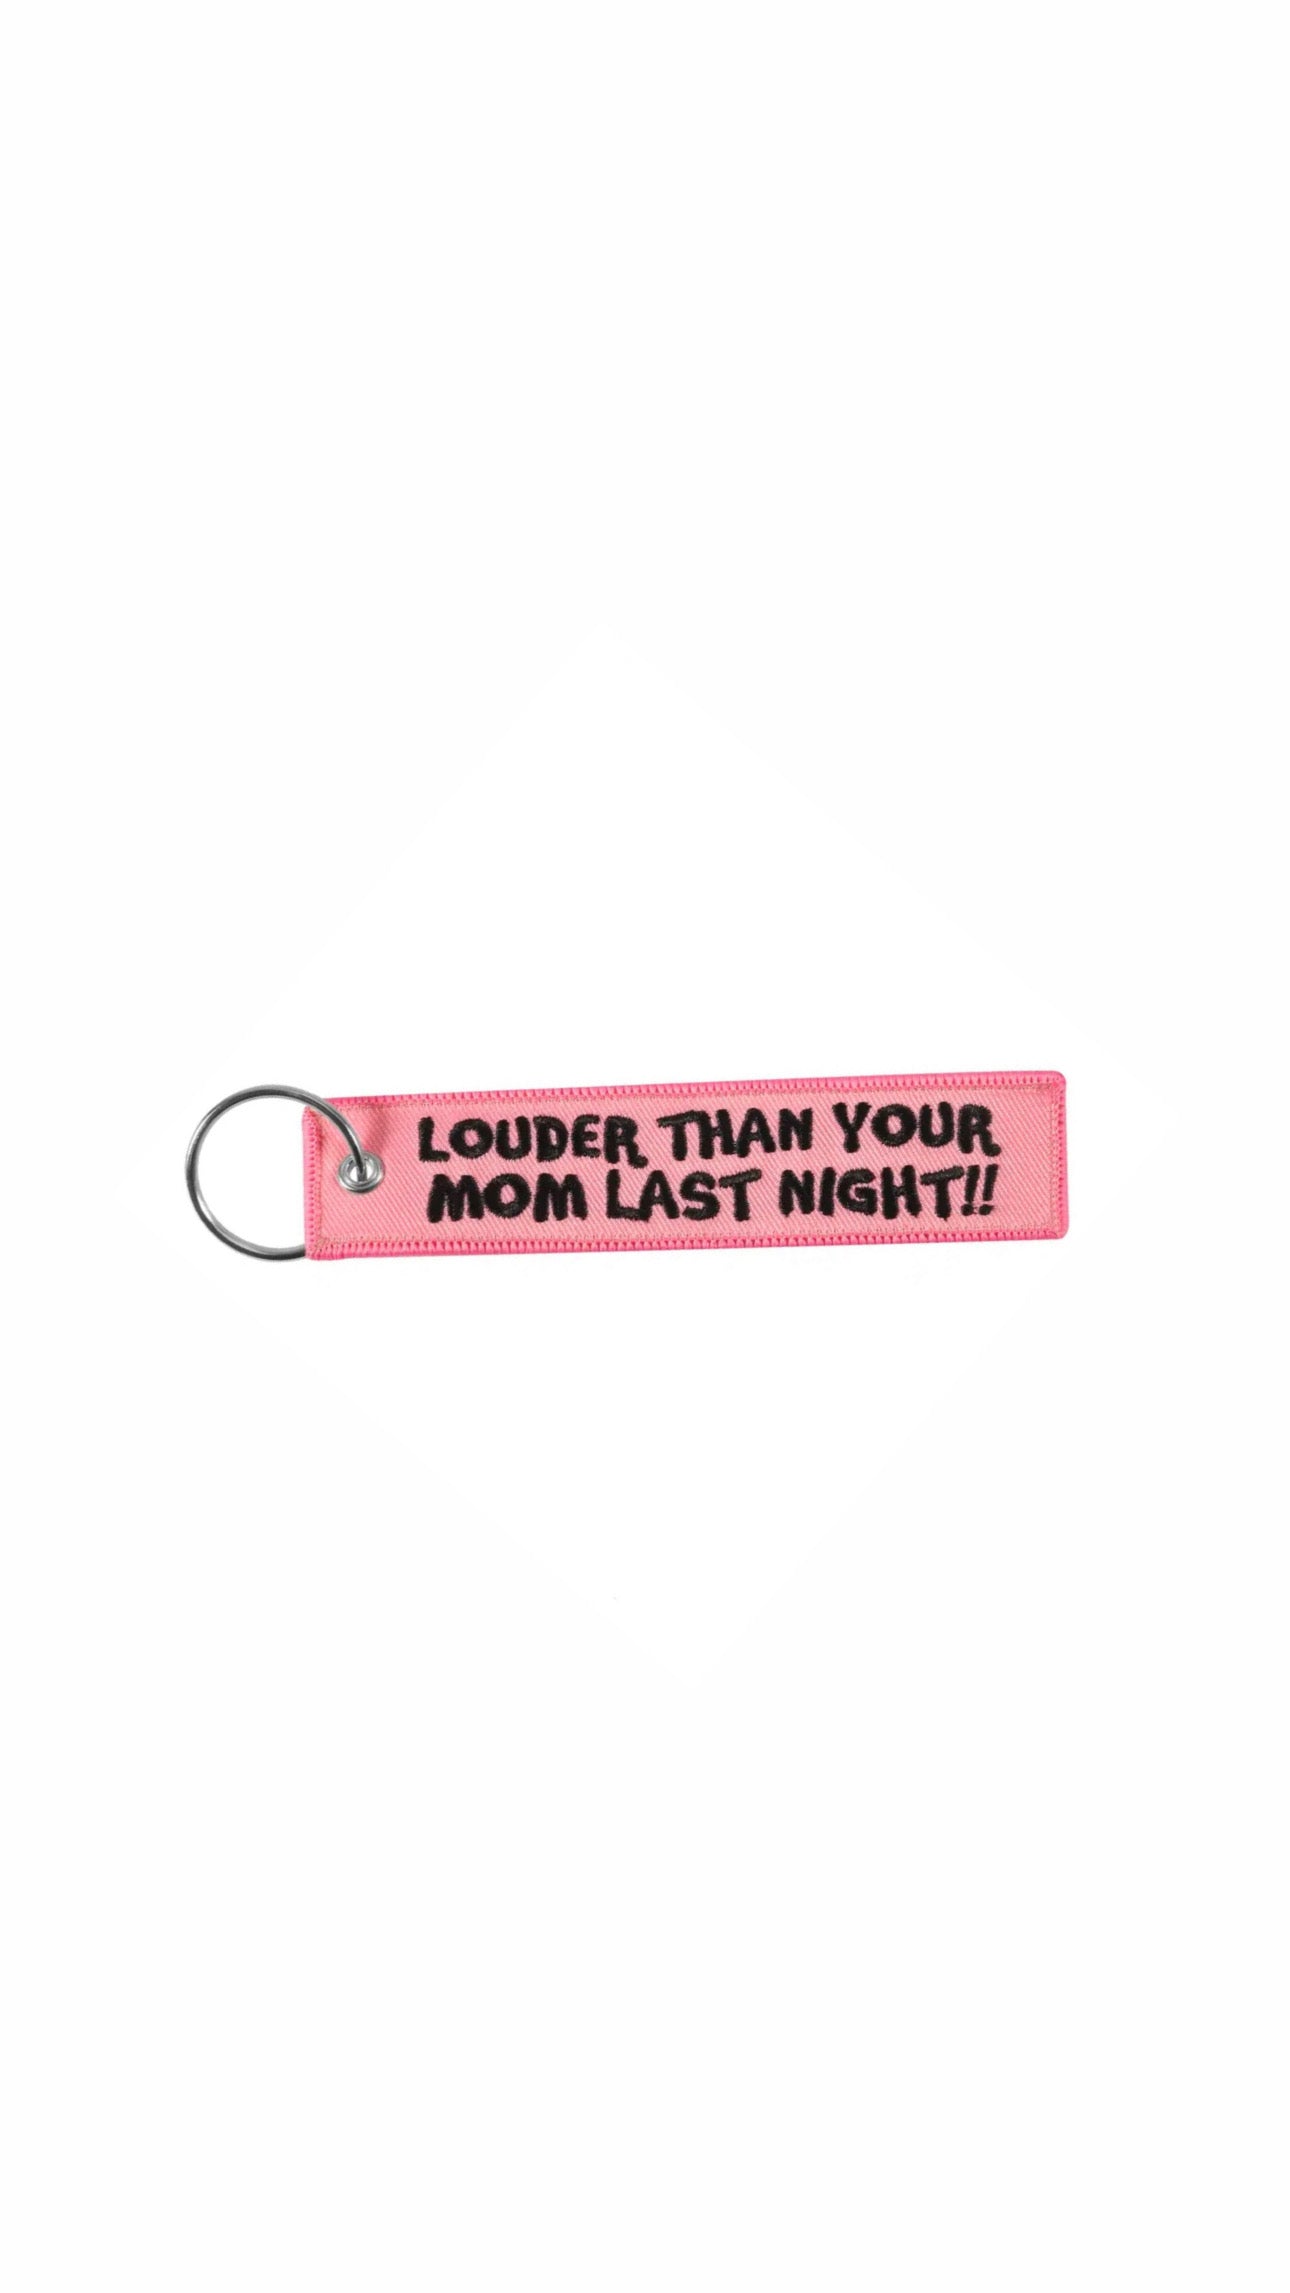 Motorcycle Keychain - Louder than your mom last night